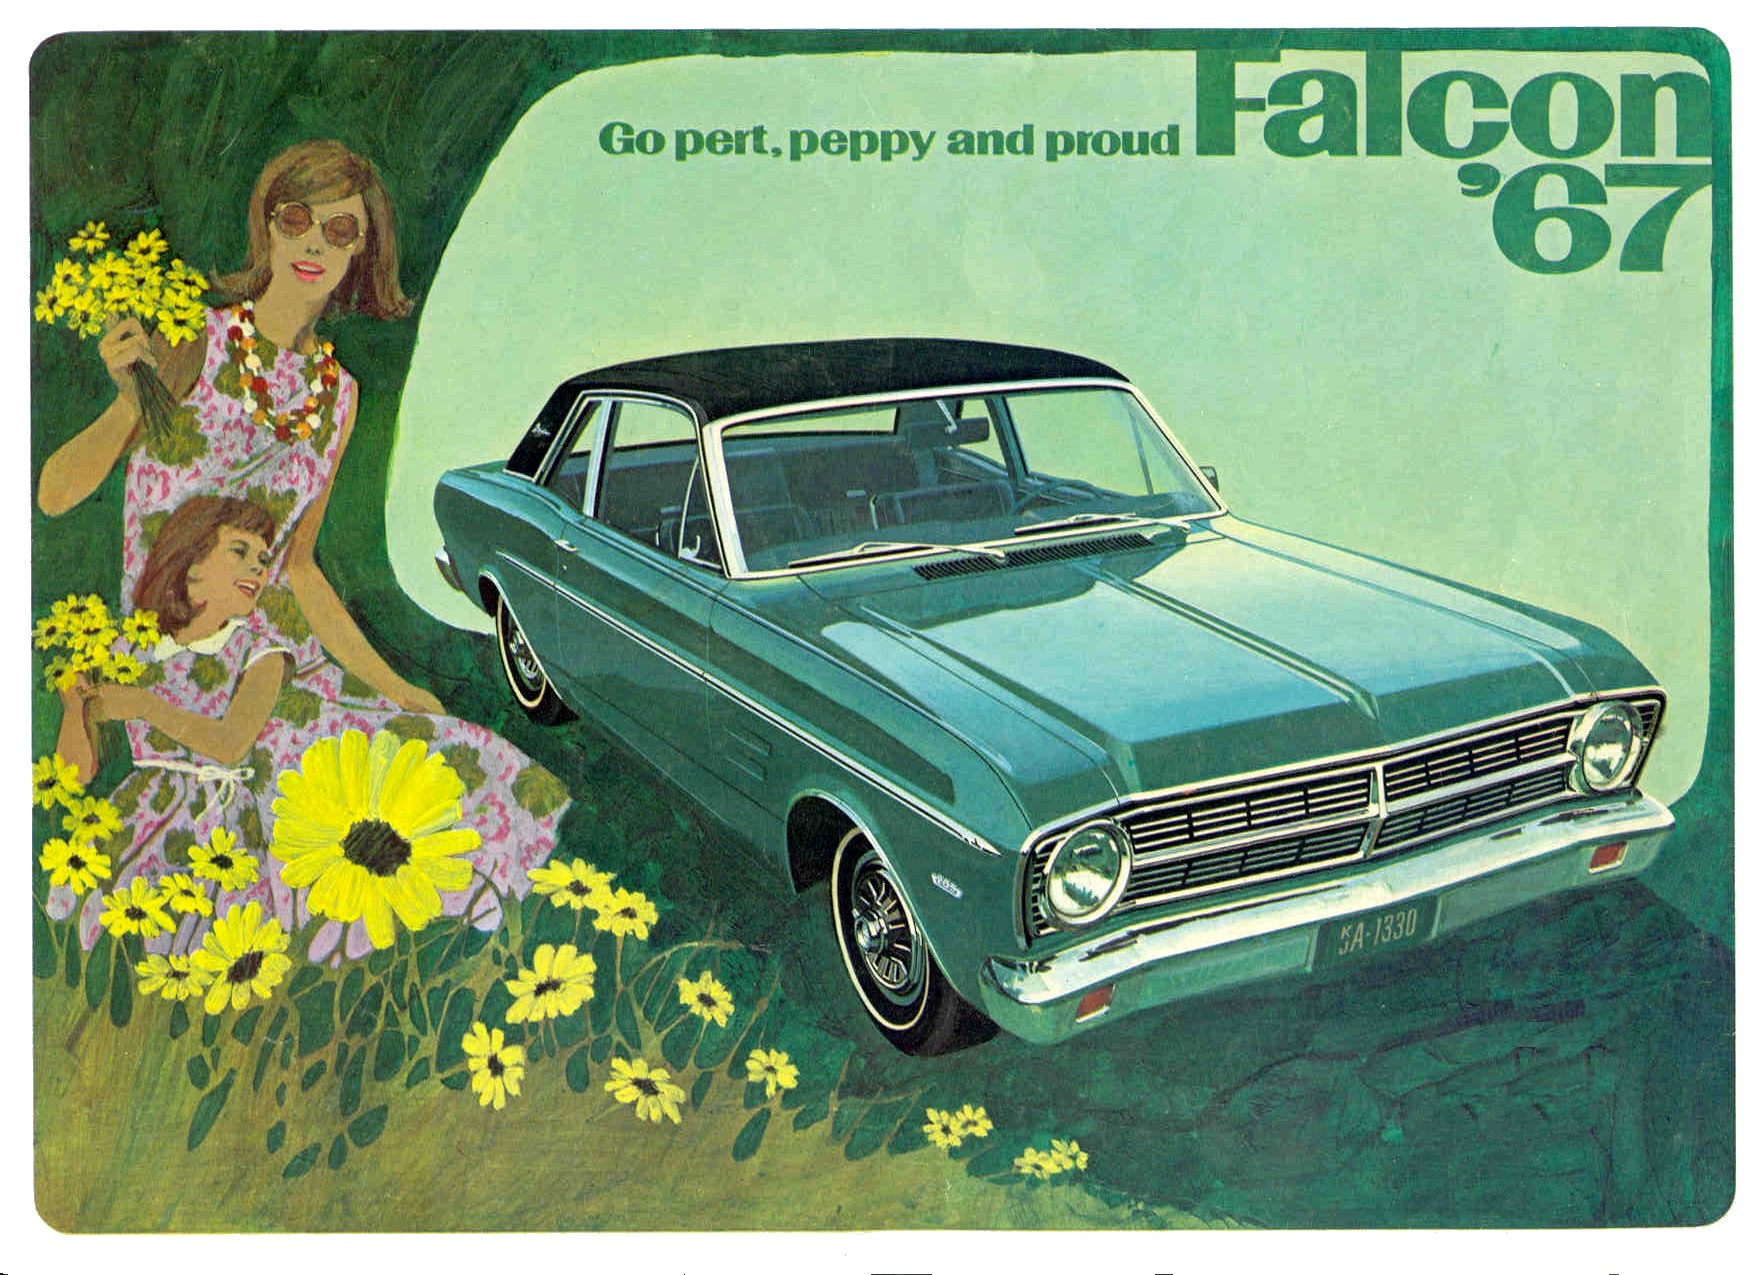 1967 Ford Falcon Canadian Brochure Page 9